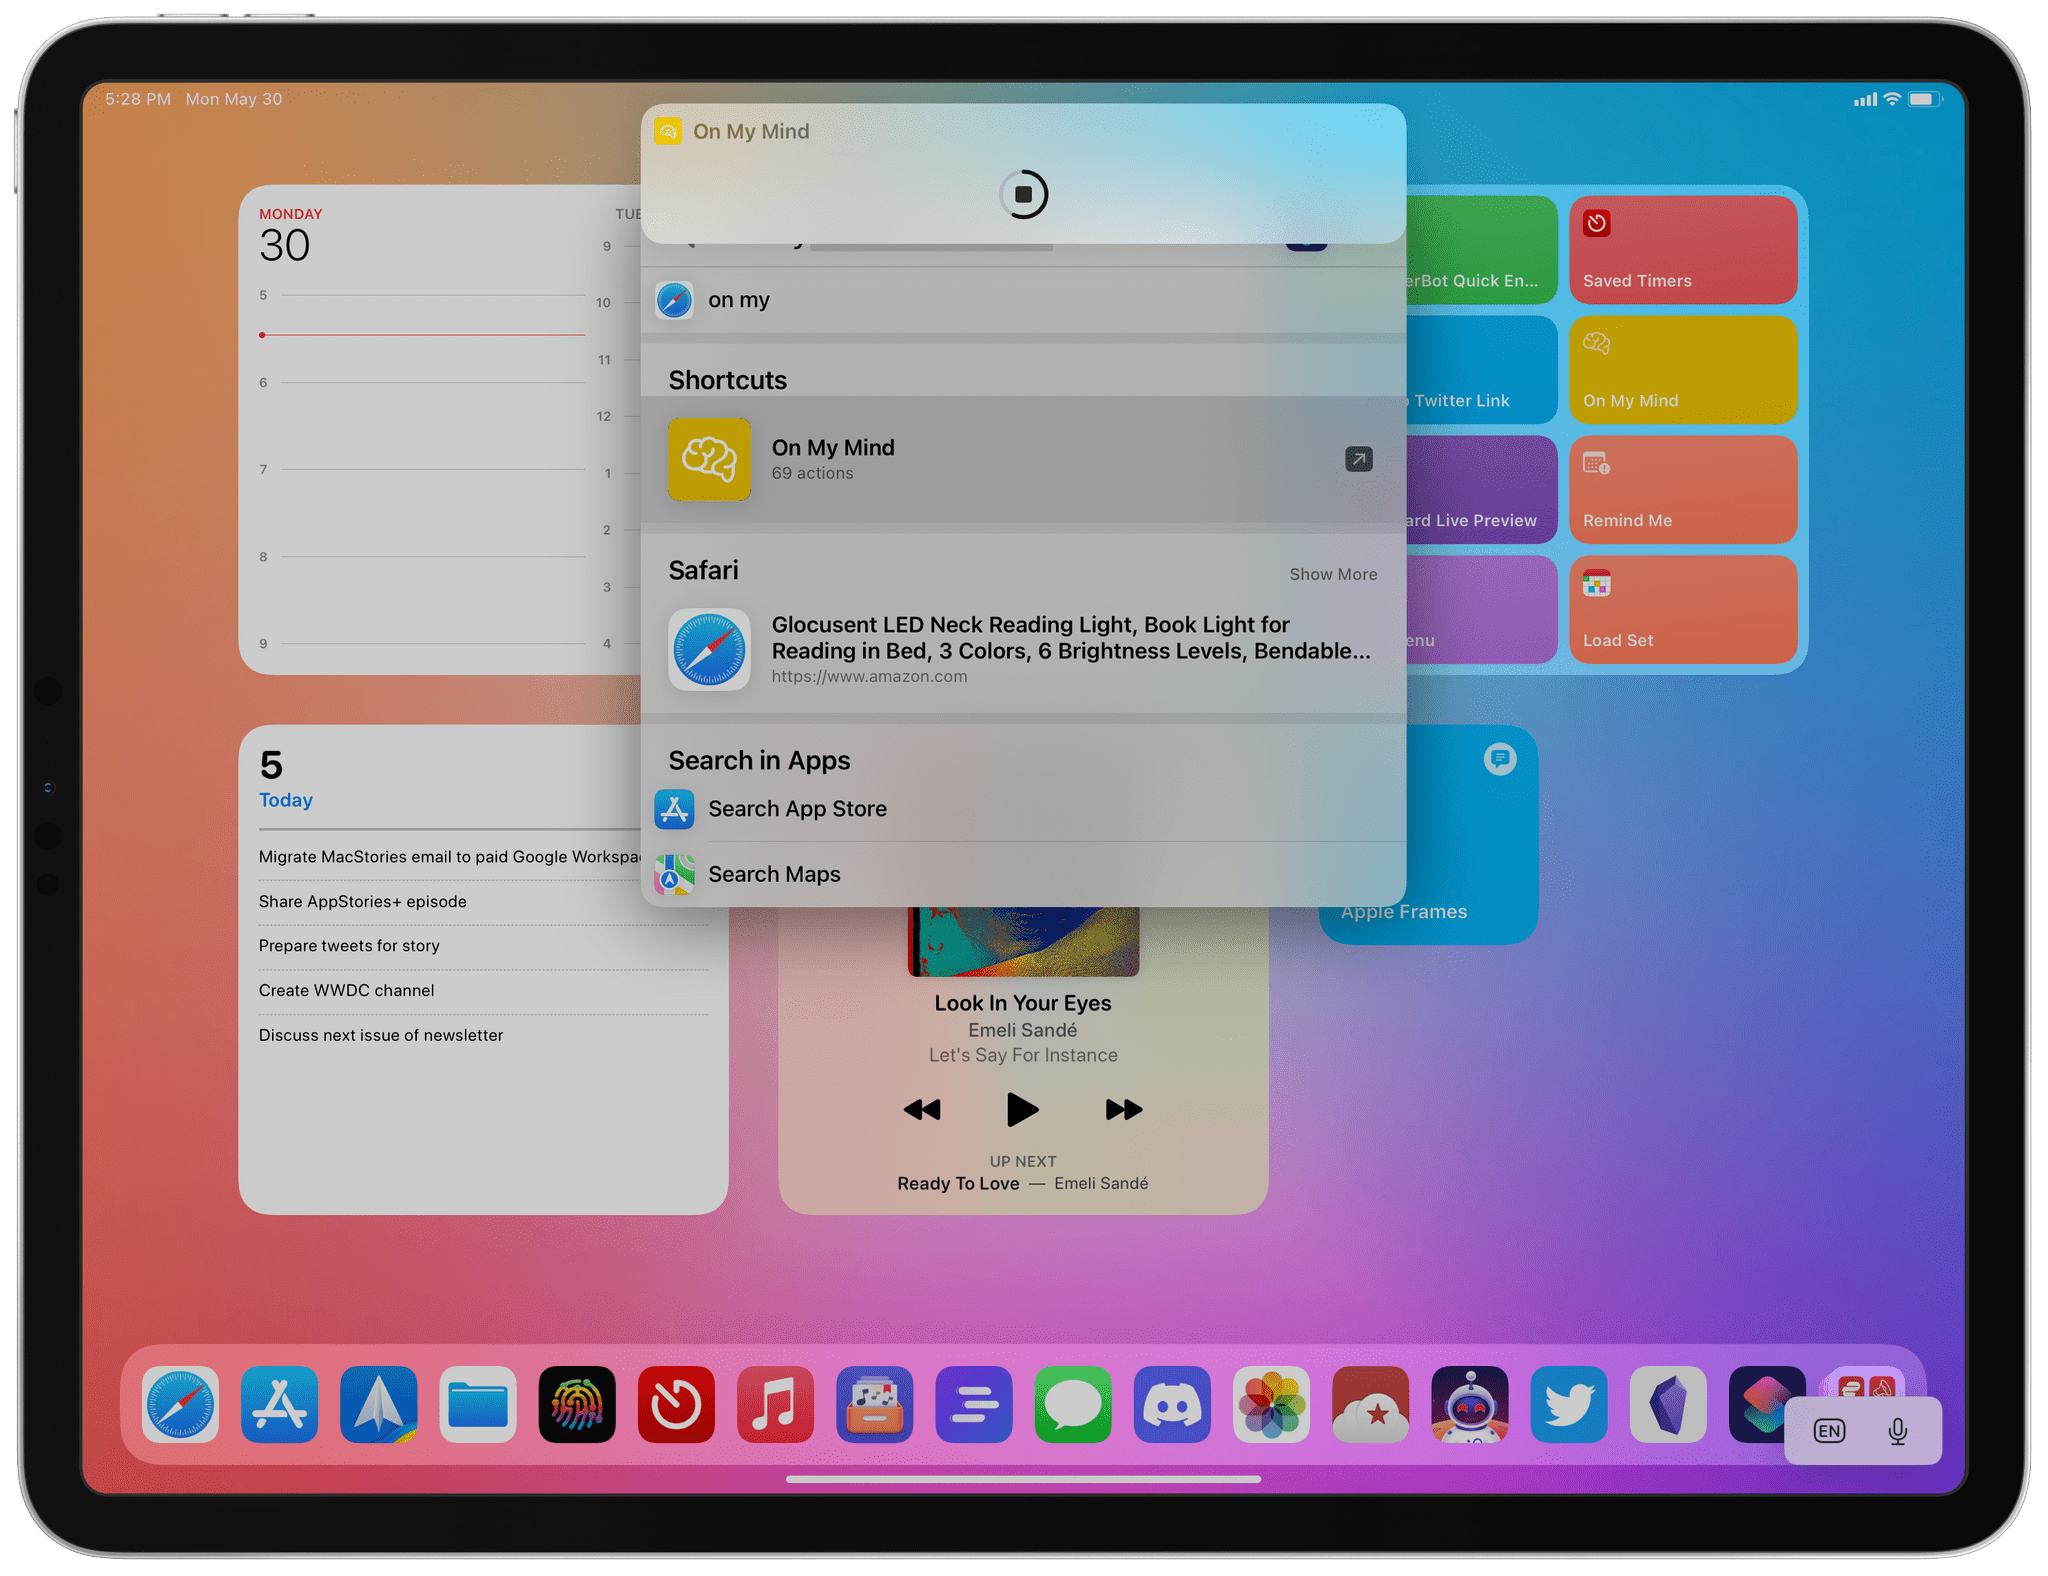 Running shortcuts from Spotlight on iPad always produces these slow, modal banners that block interactions with the OS. As a result, I never run shortcuts this way on iPad.